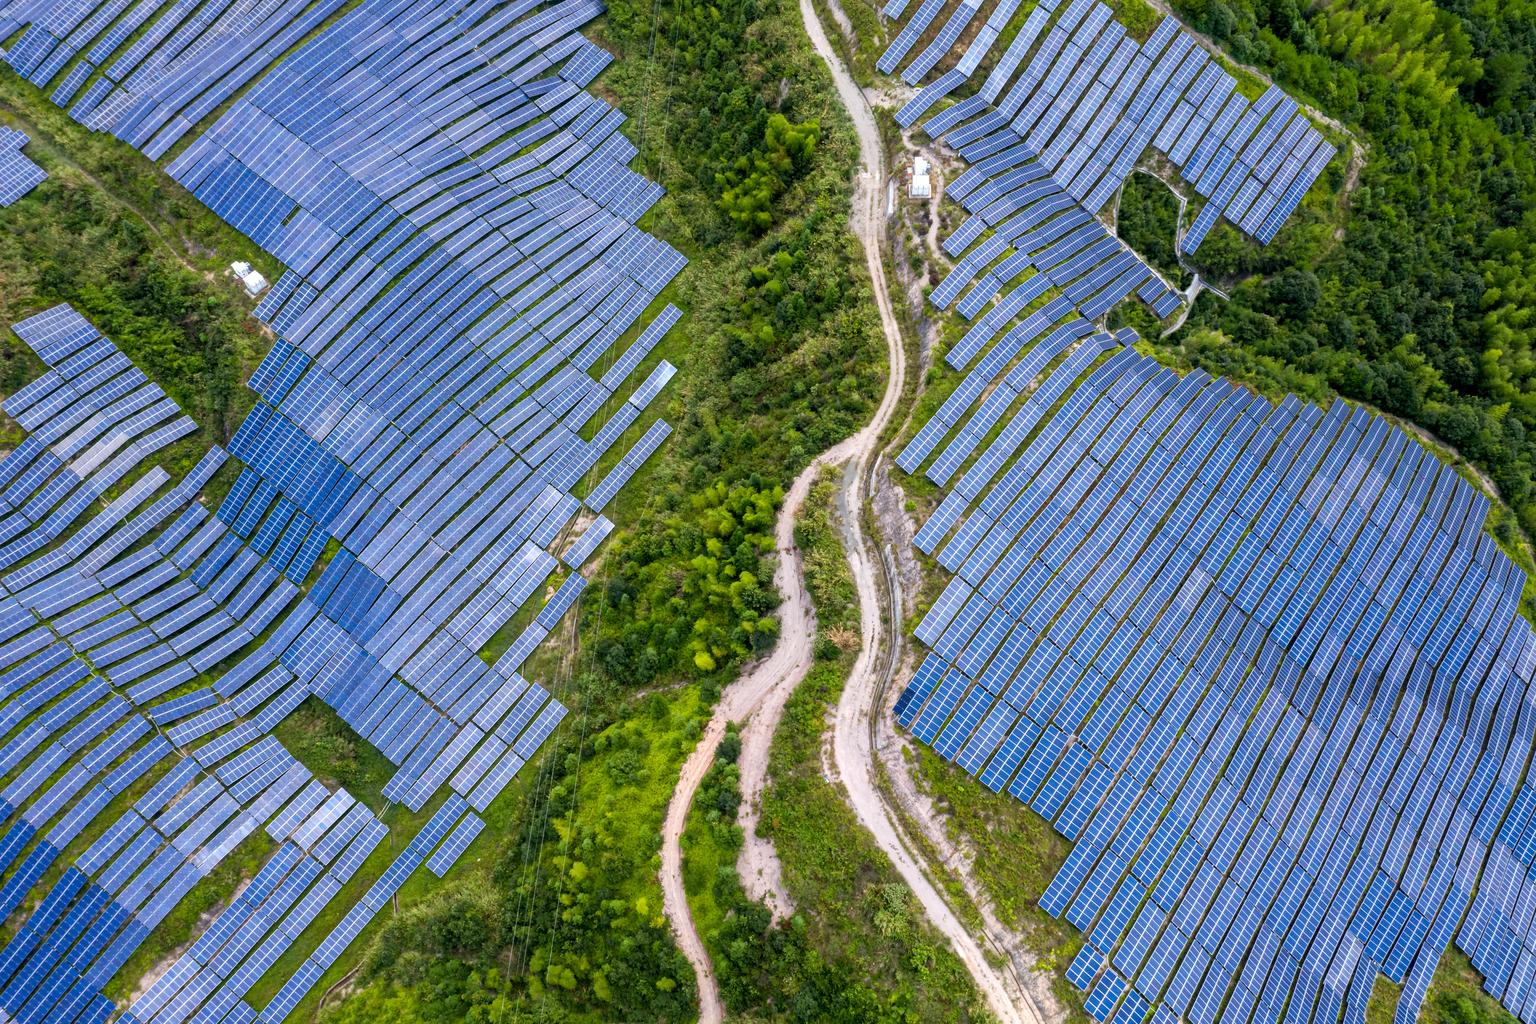 Aerial view of the photovoltaic solar power plant on the top of the mountain